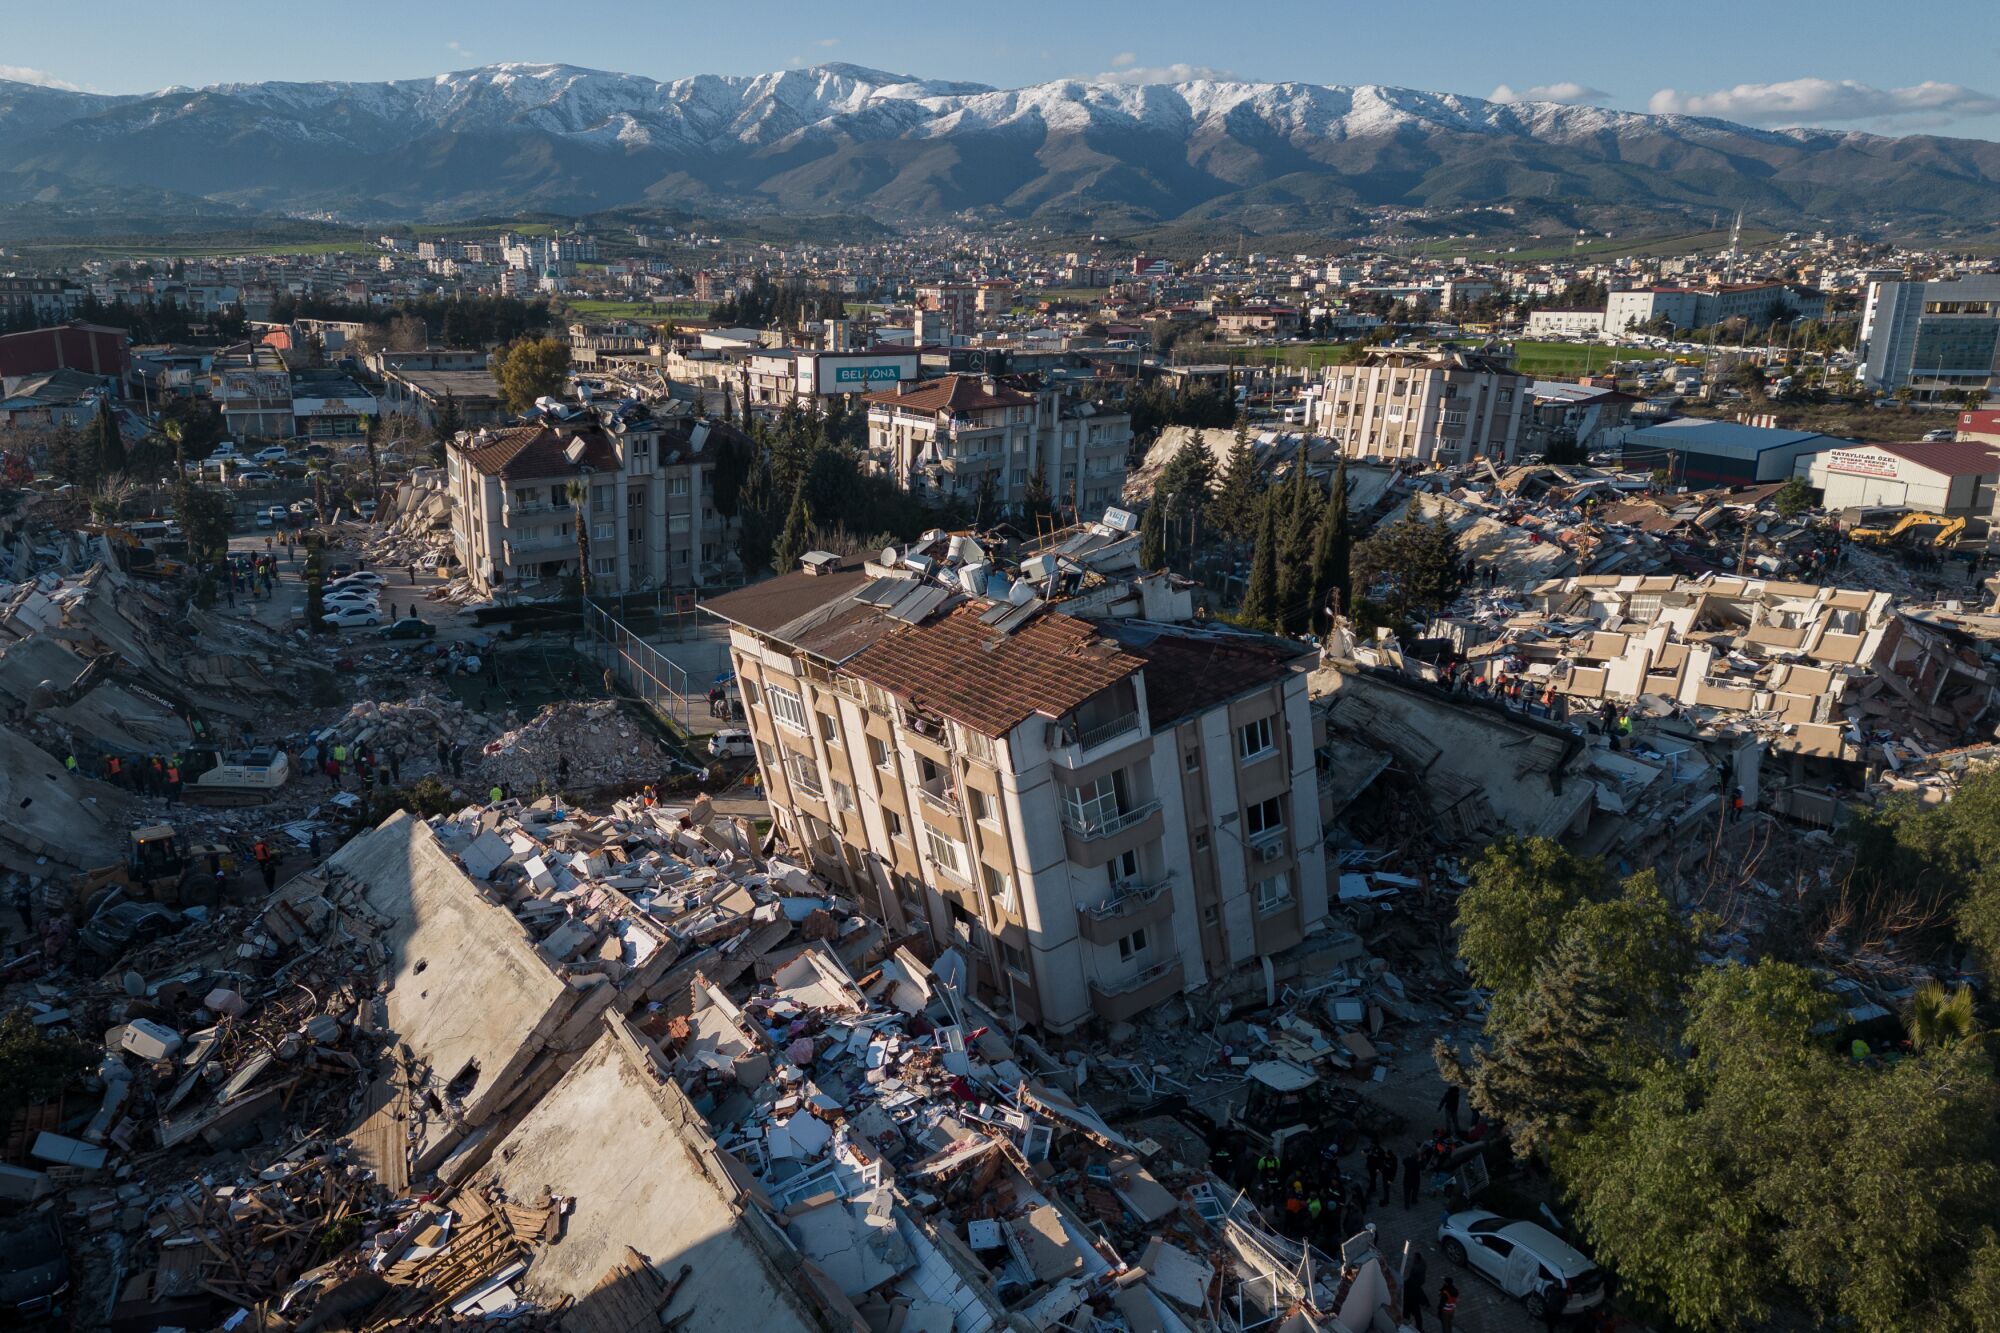 General view of buildings in Antakya, Turkey, destroyed in the recent earthquake